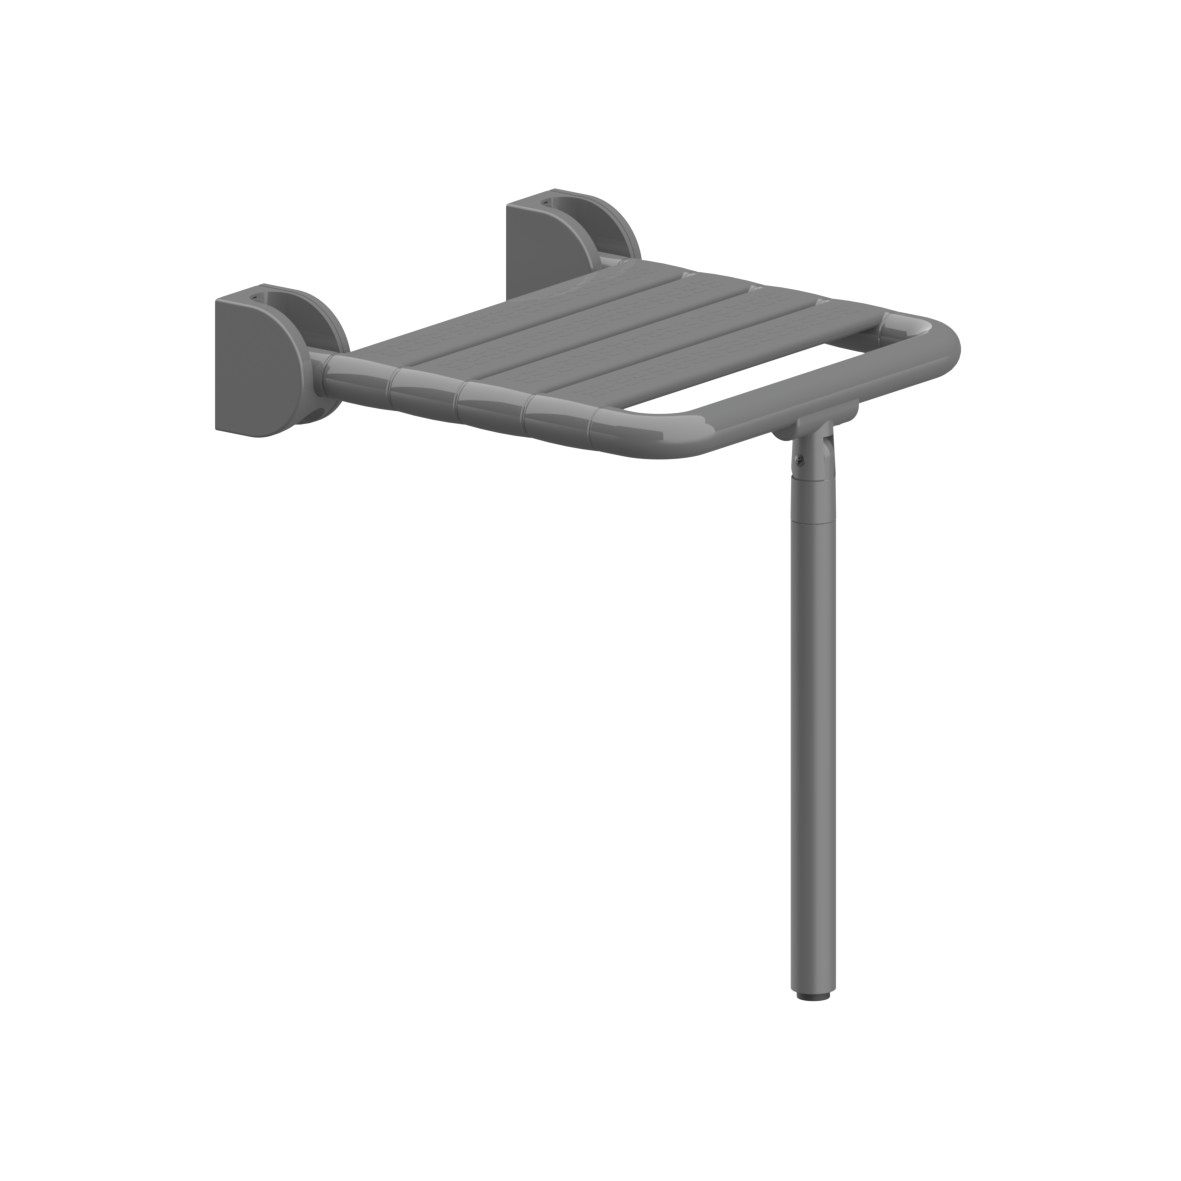 Nylon Care 400 Lift-up shower seat, with floor support, 406 x 410 x 480 mm, Dark grey